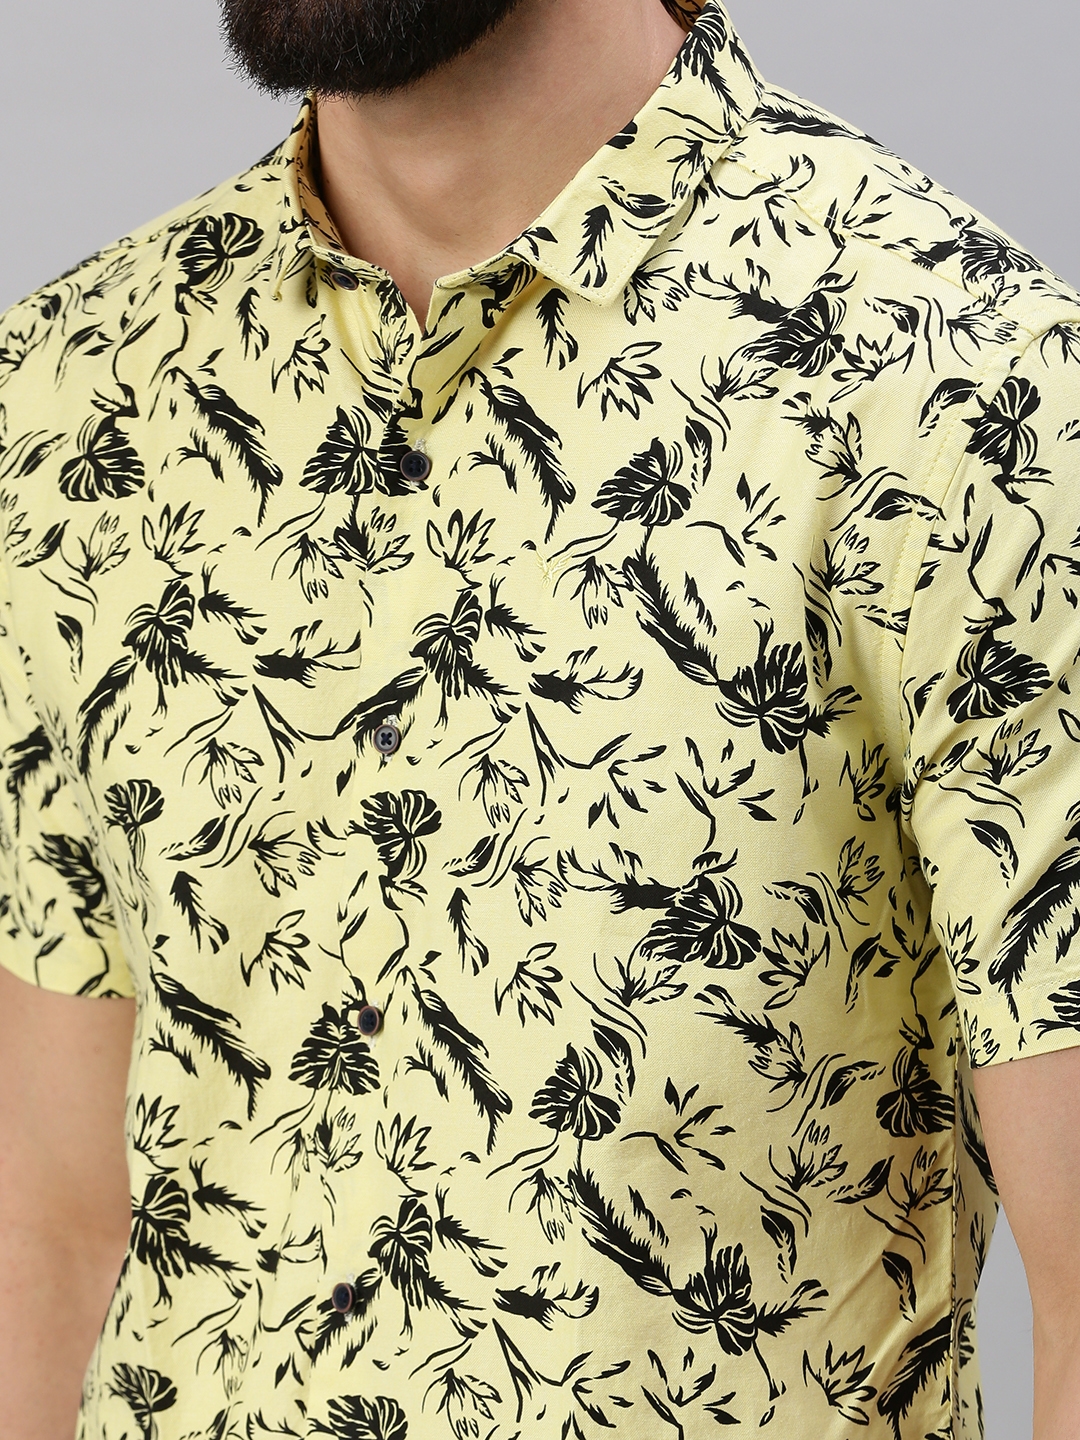 Men's Yellow Polycotton Solid Casual Shirts